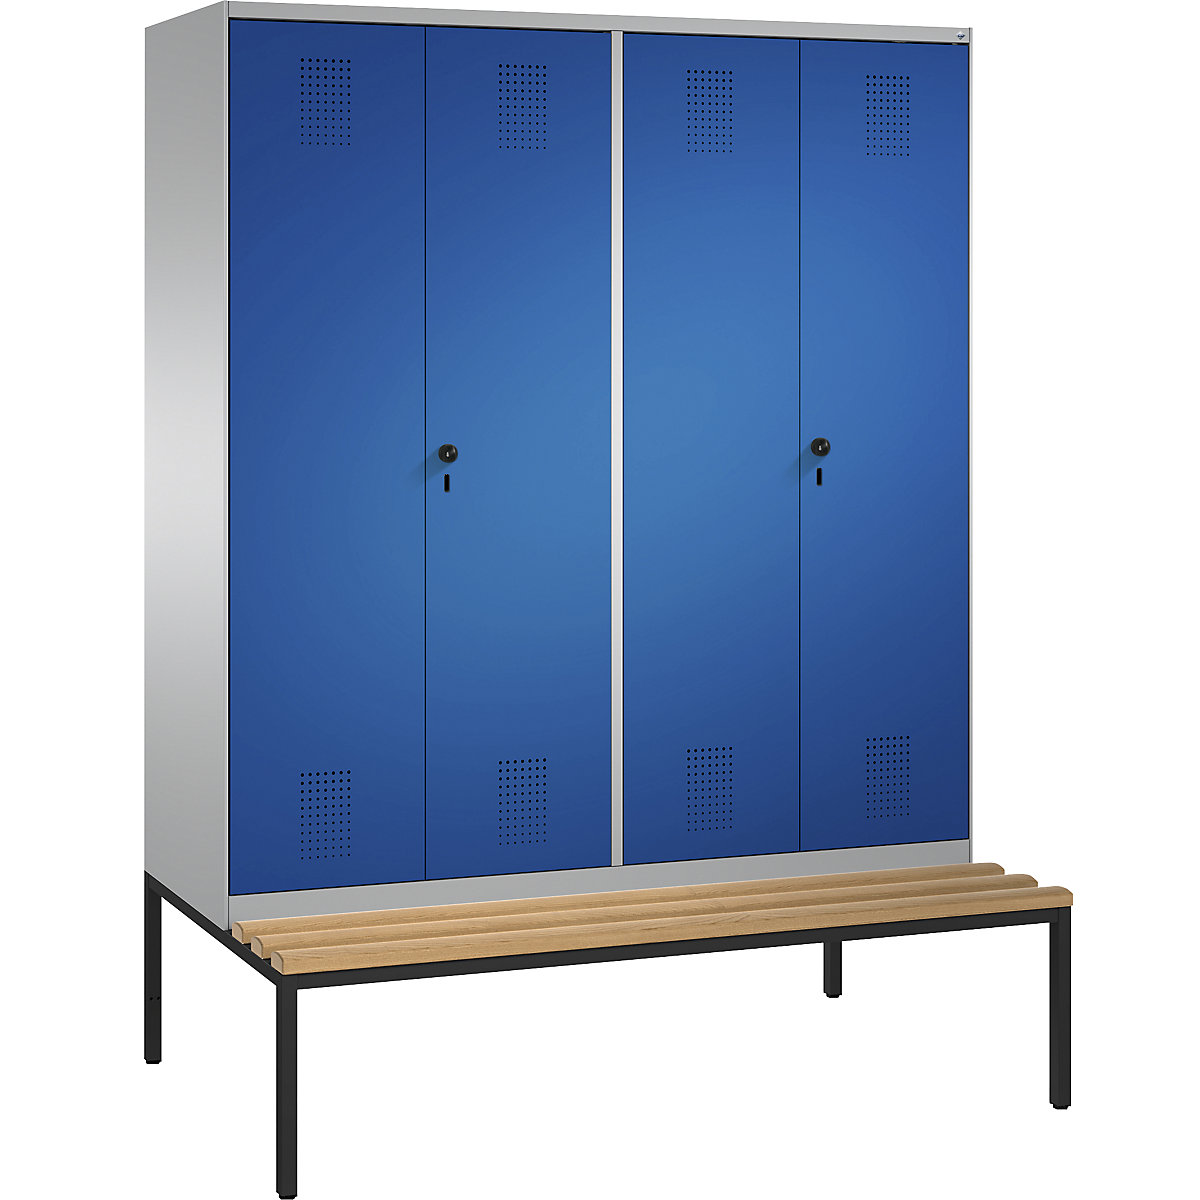 EVOLO cloakroom locker, doors close in the middle, with bench – C+P, 4 compartments, compartment width 400 mm, white aluminium / gentian blue-16